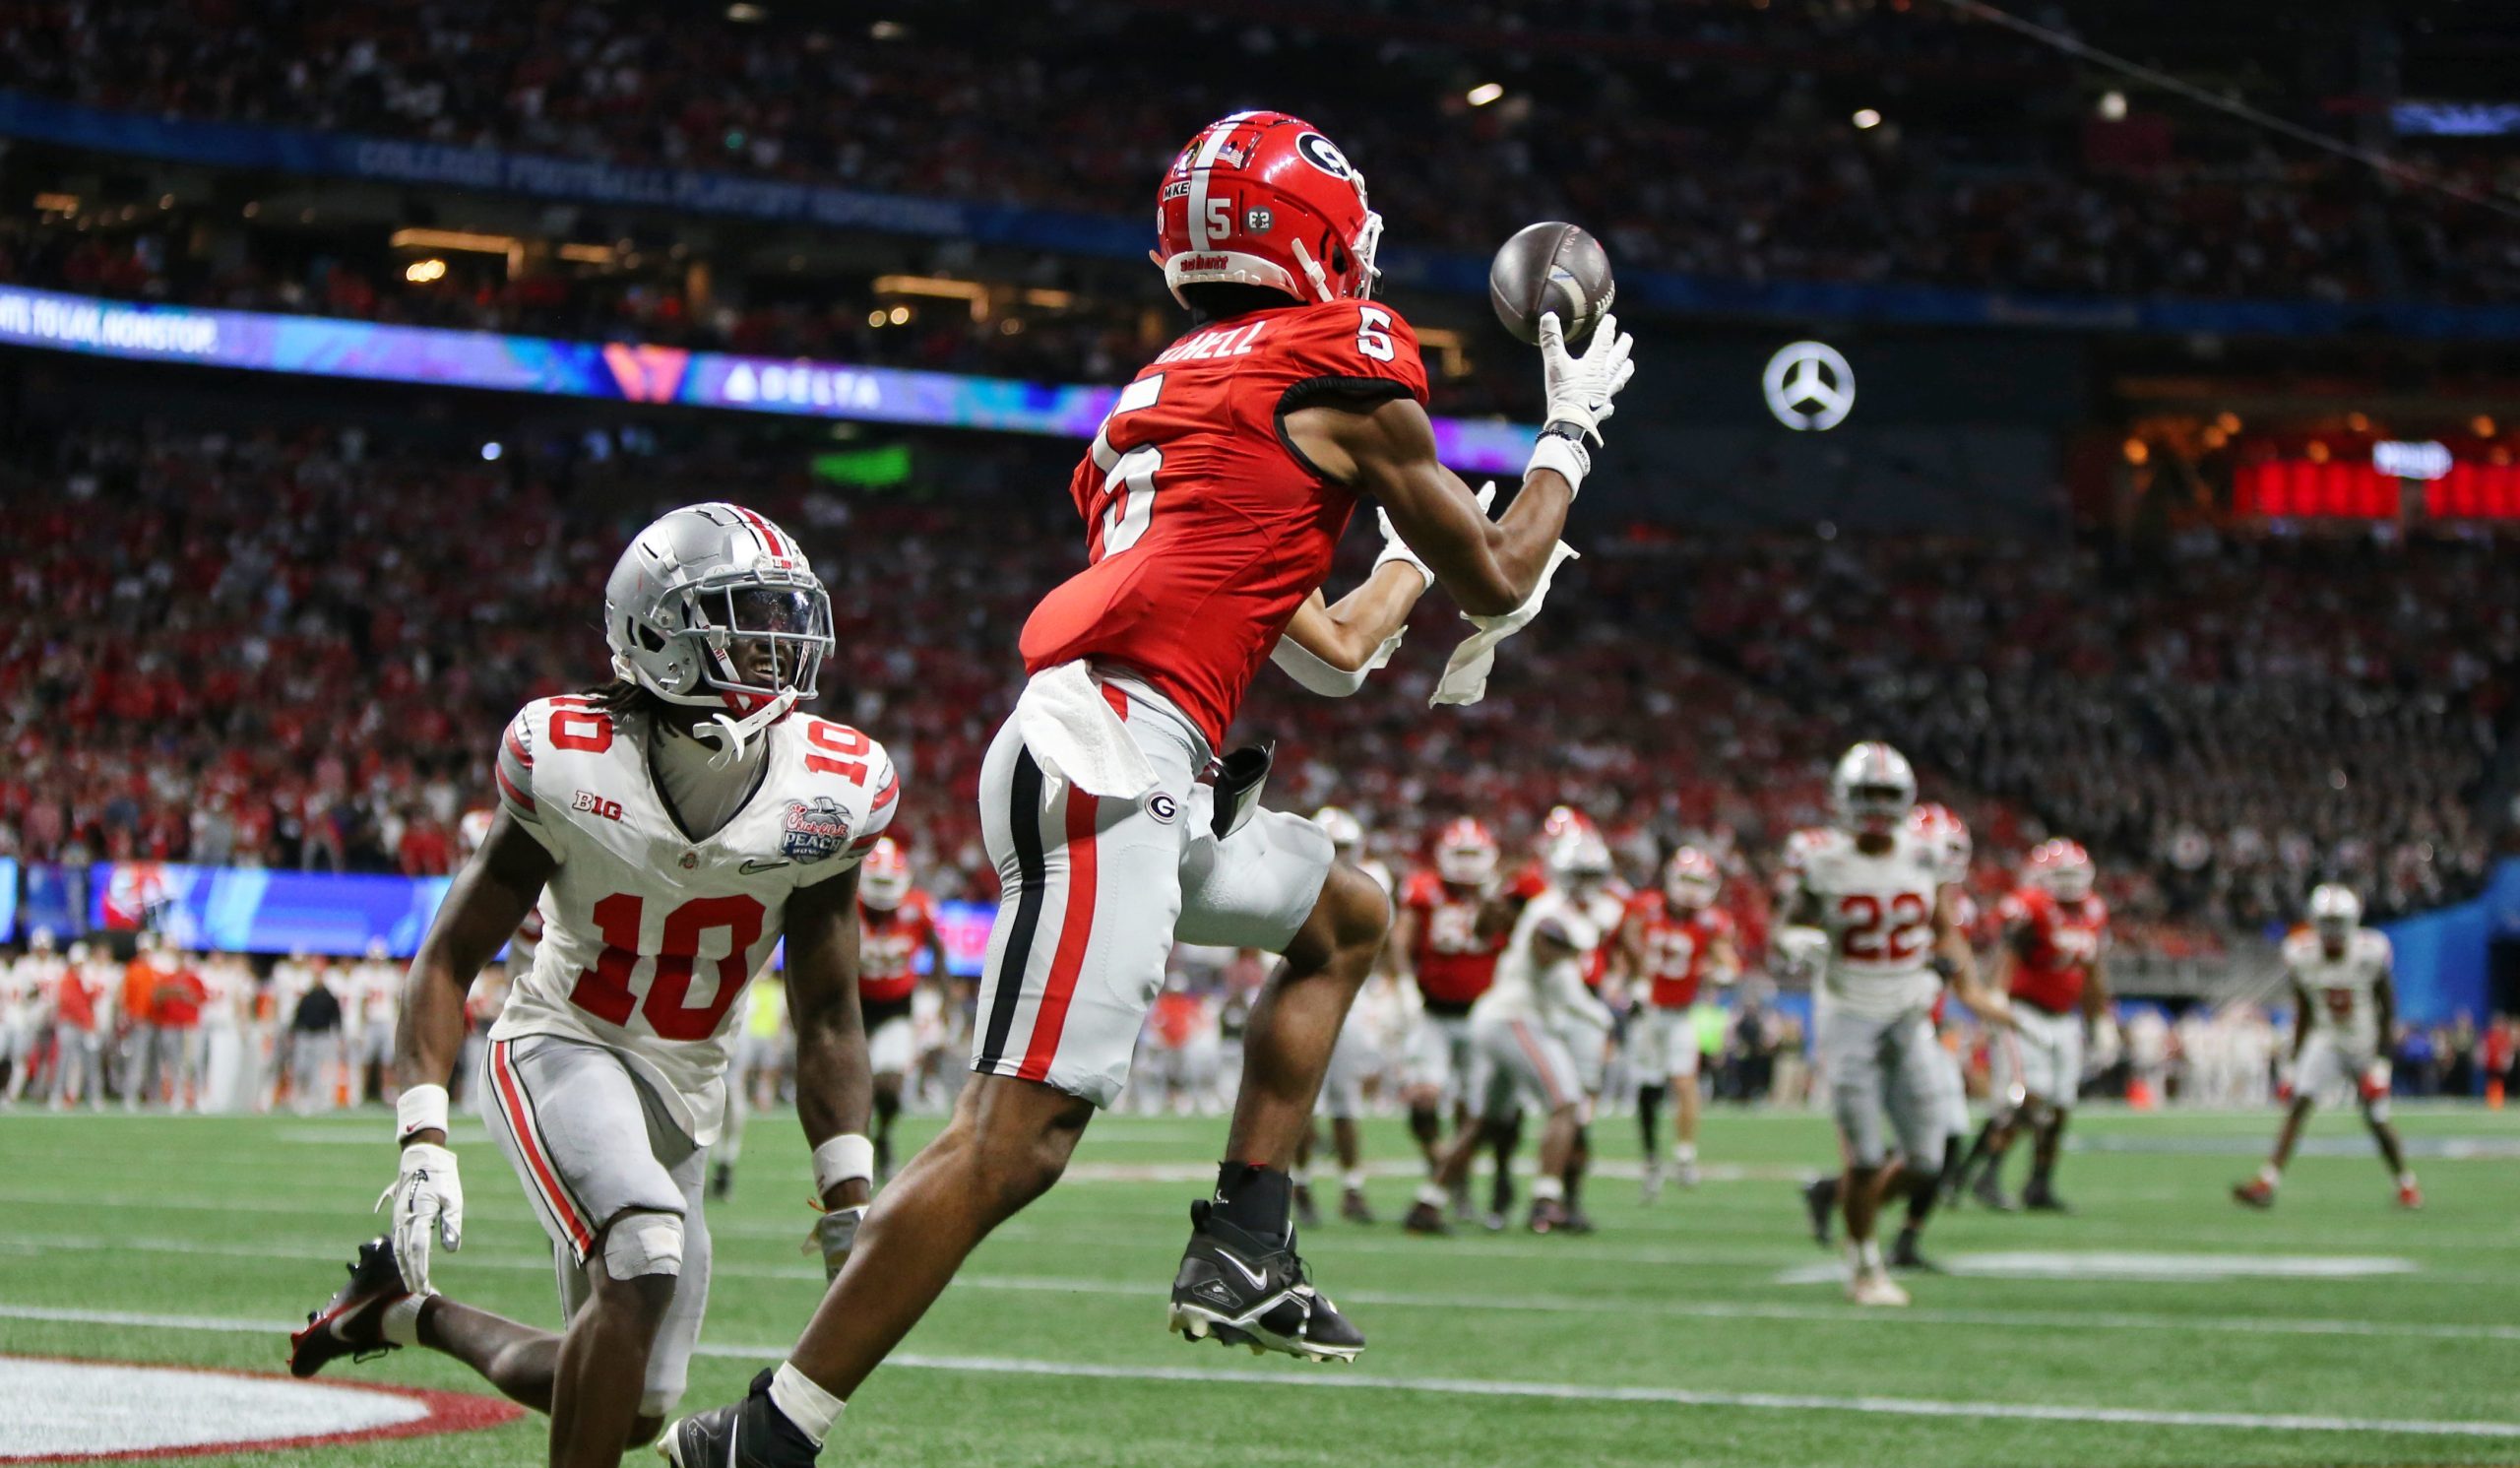 Adonai Mitchell catches a last-minute touchdown in the Georgia Bulldogs' College Football Playoff win over the Ohio State Buckeyes.